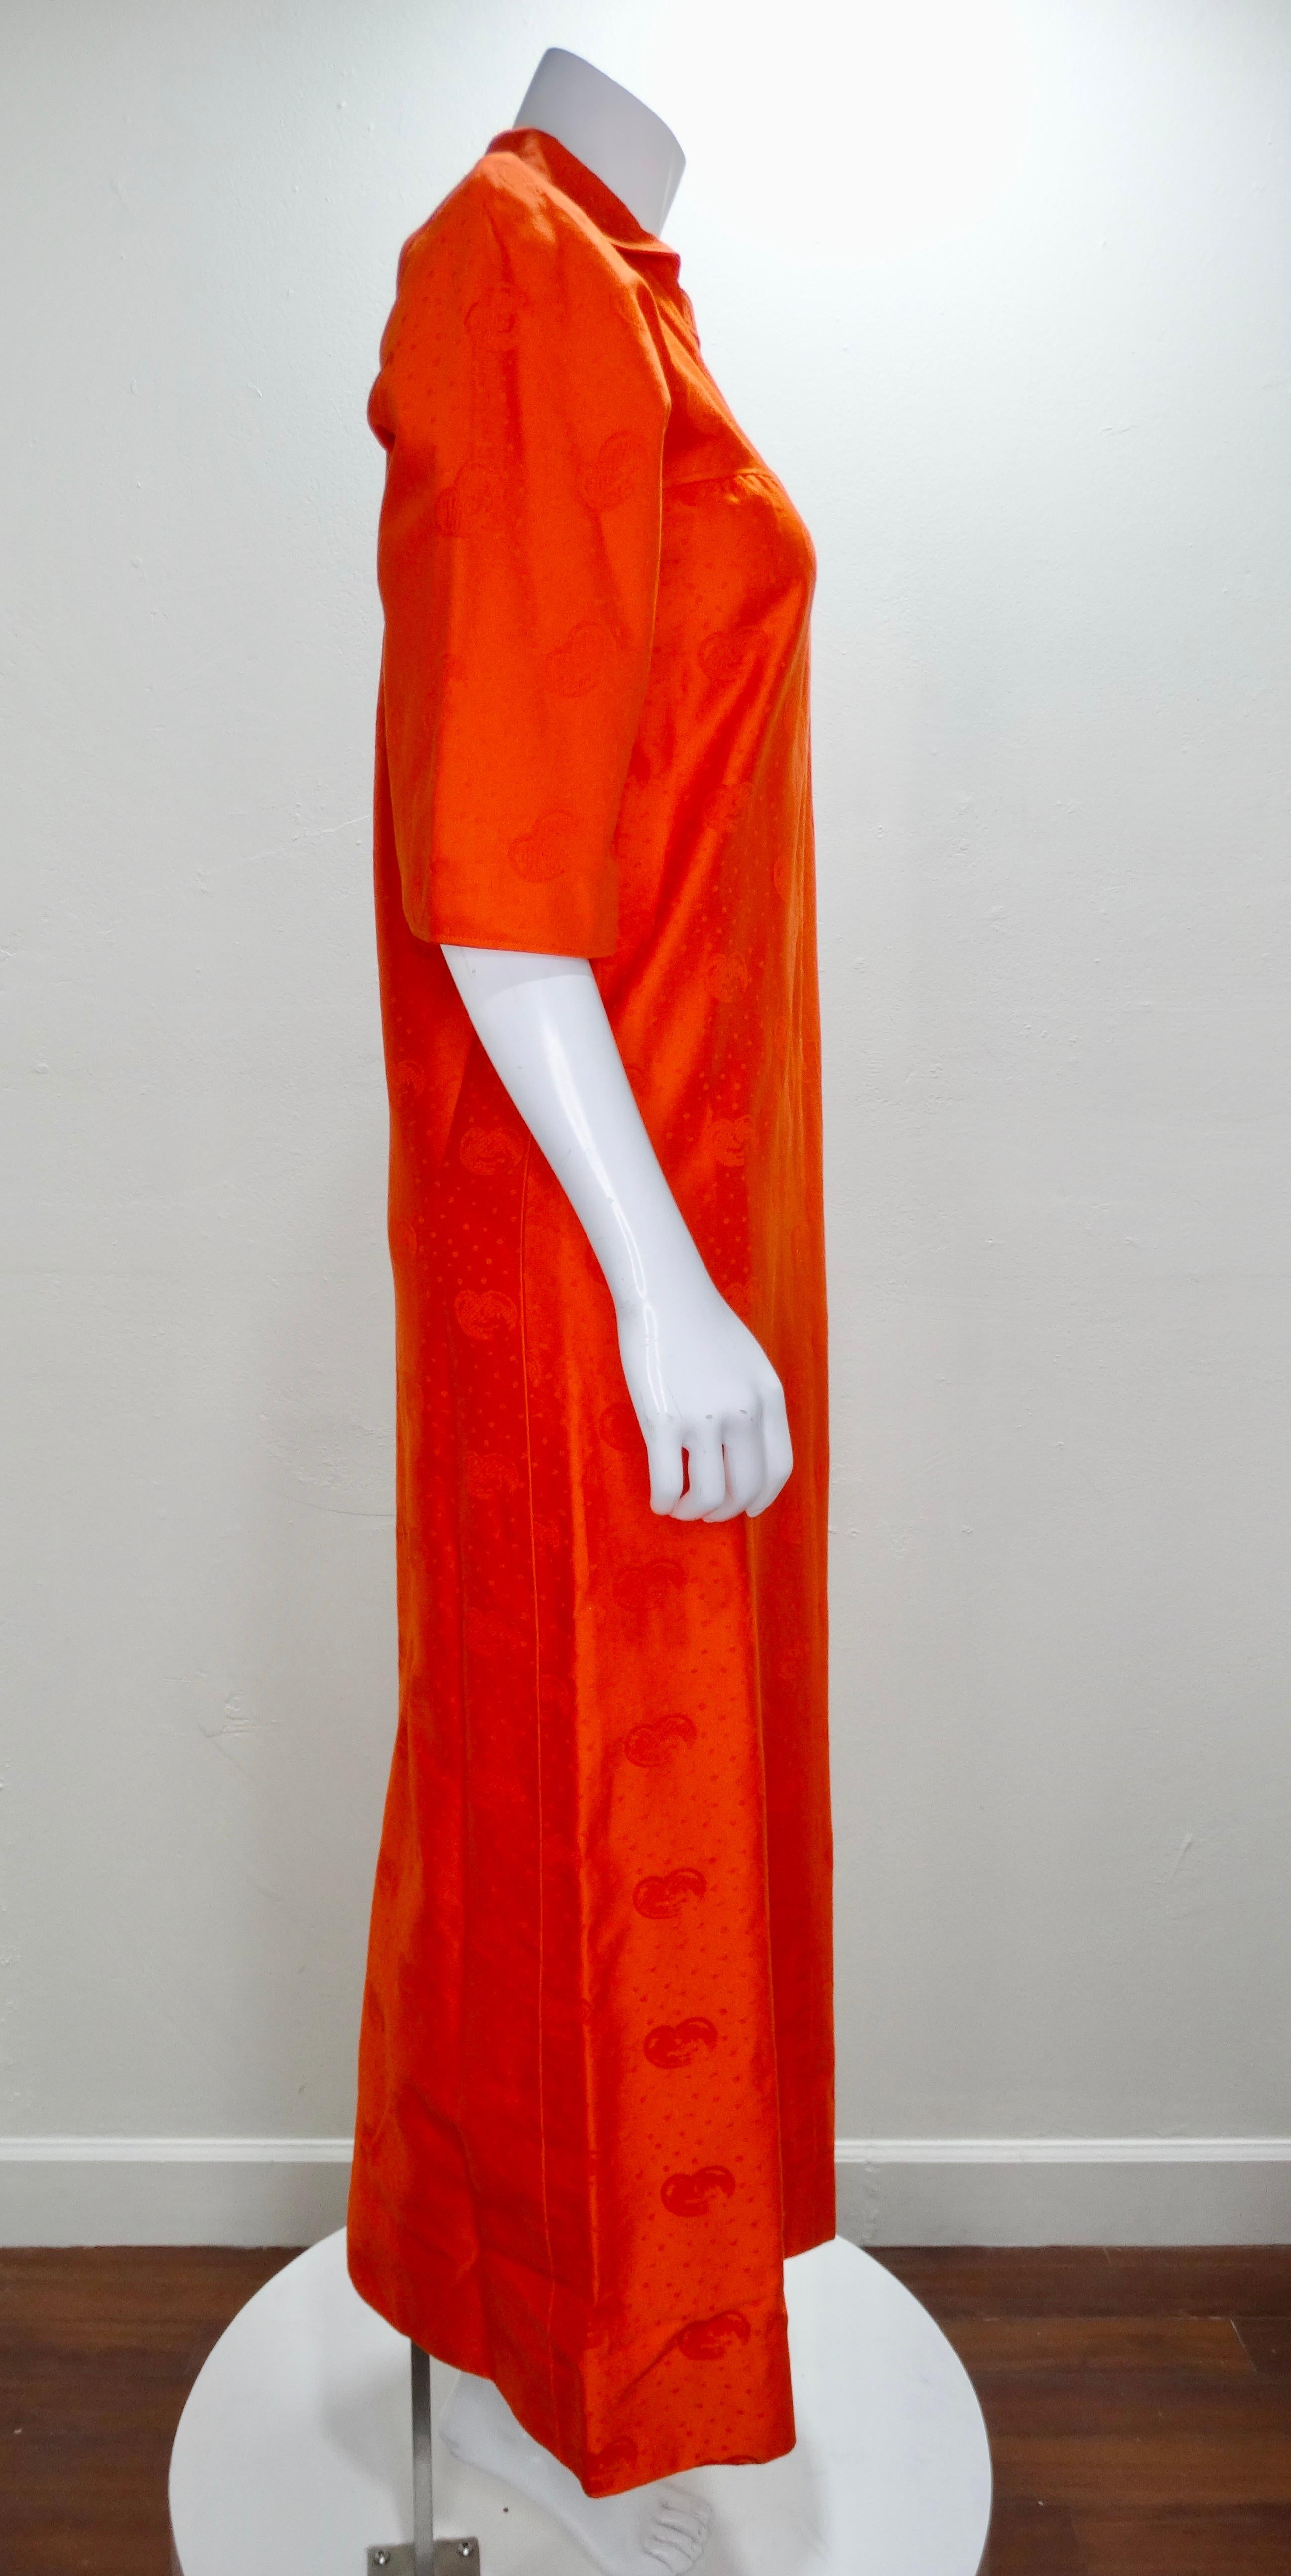 The most stunning kaftan by no other than the French label Courreges! Circa 1970s, this beautiful orange kaftan is crafted from 100% cotton and features an abstract print, a front zipper closure with a detailed v-neck and quarter bell sleeves. A